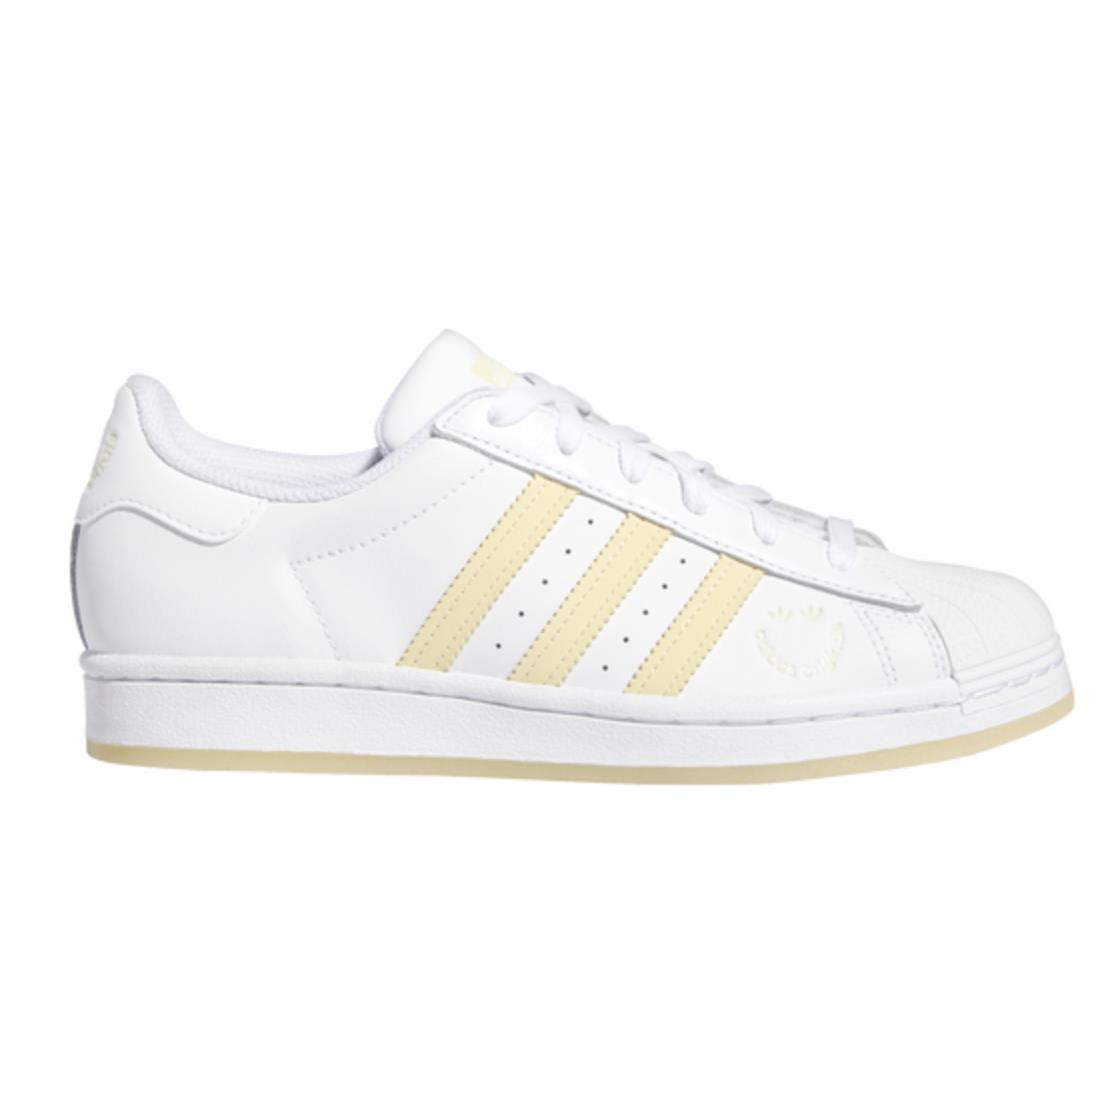 Adidas Originals Superstar Women`s Sneakers Shoes White Yellow 6 -10